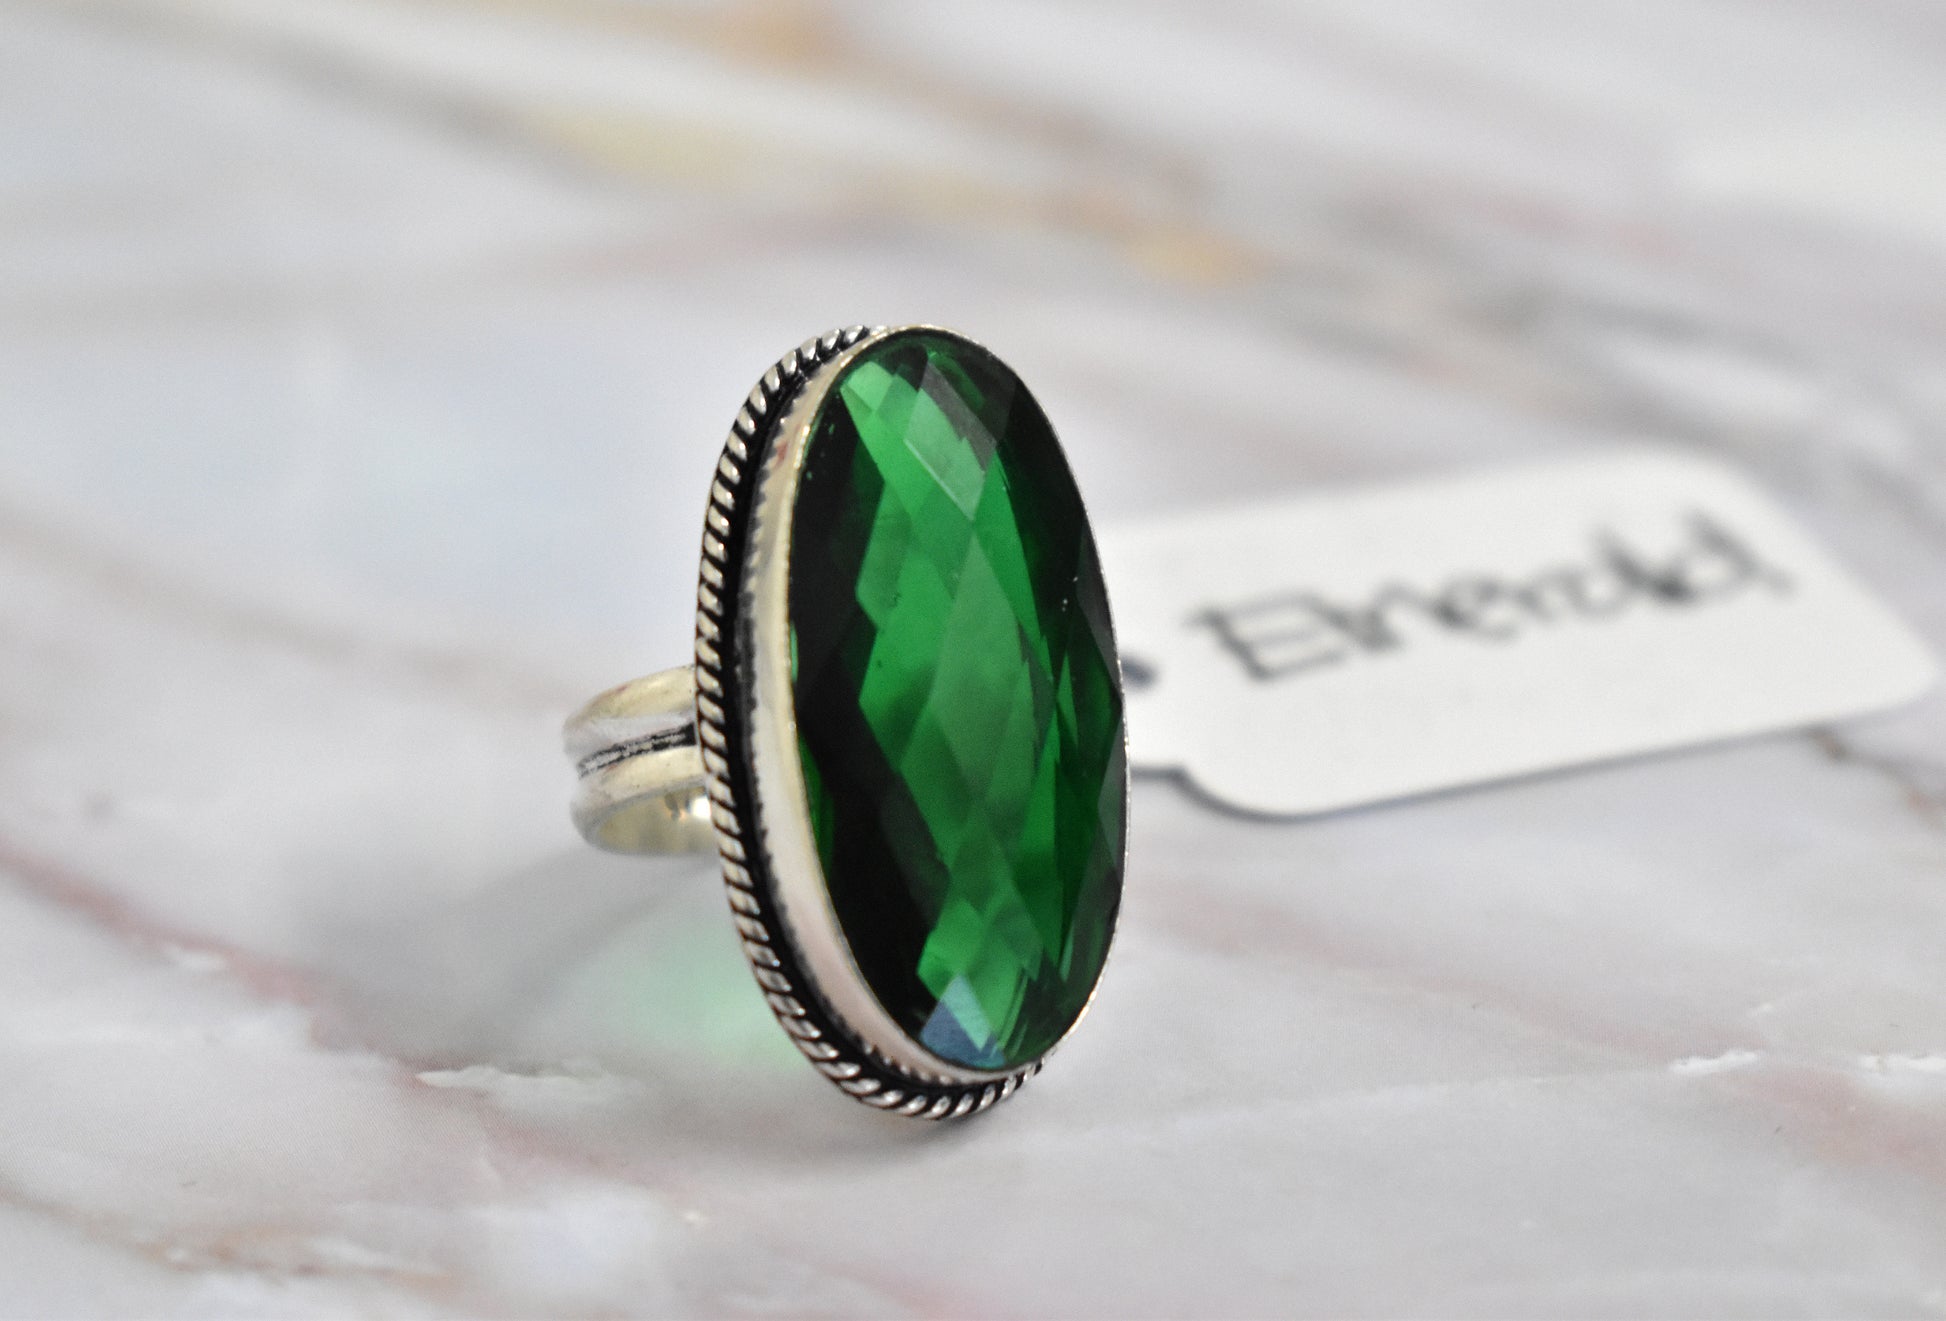 stones-of-transformation - Emerald Ring (Size 8) - Stones of Transformation - 